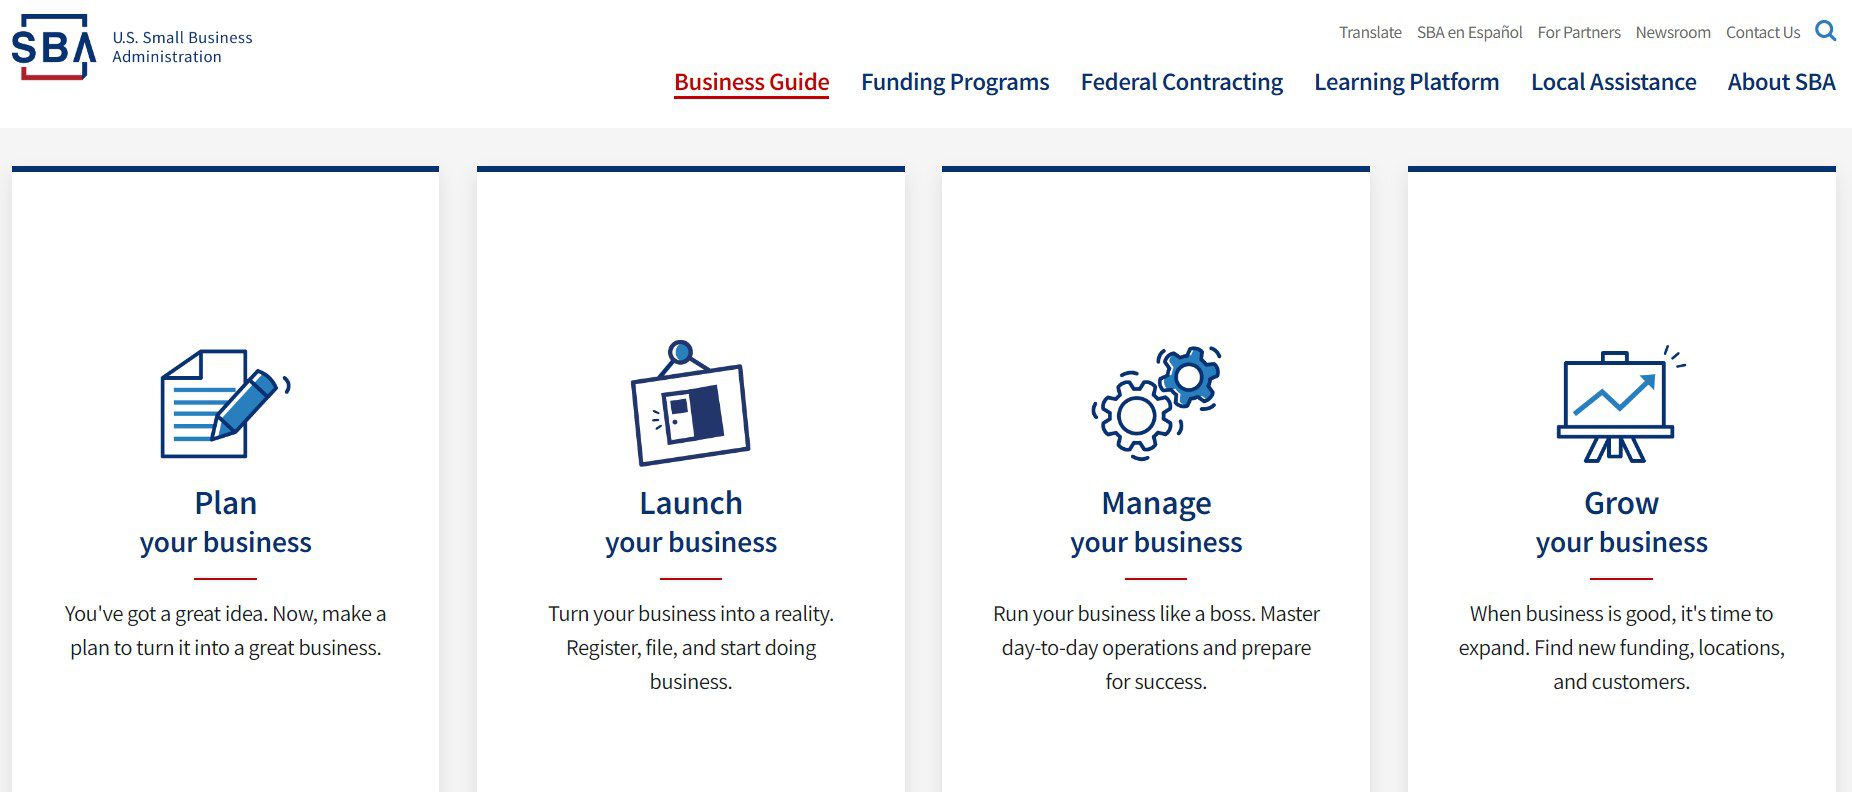 Small Business Administration start up guides